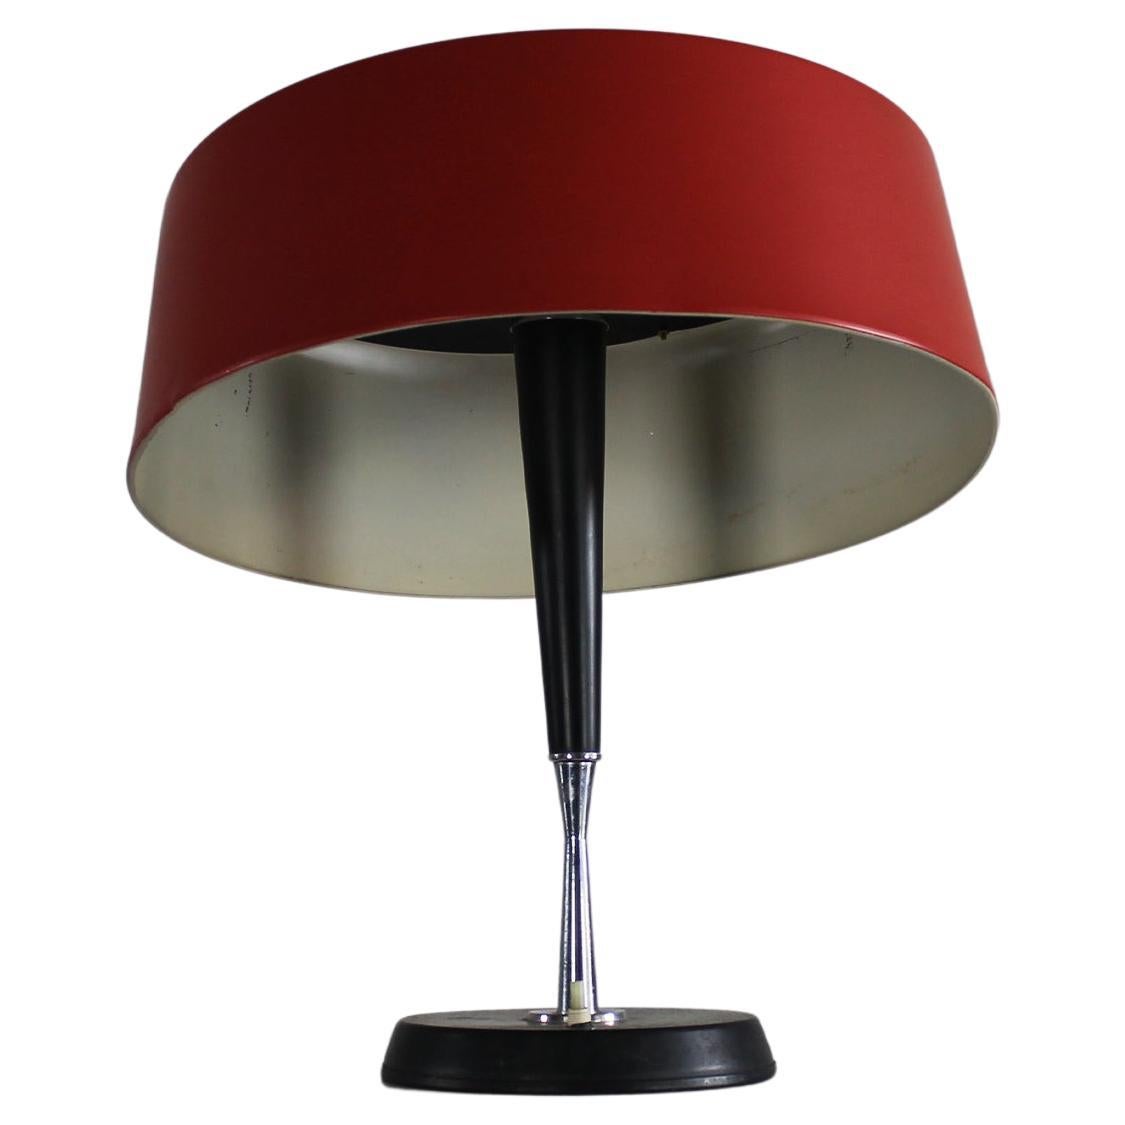 Vintage Table Lamp in Red Lacquered Aluminum by Oscar Torlasco 1950s Italy